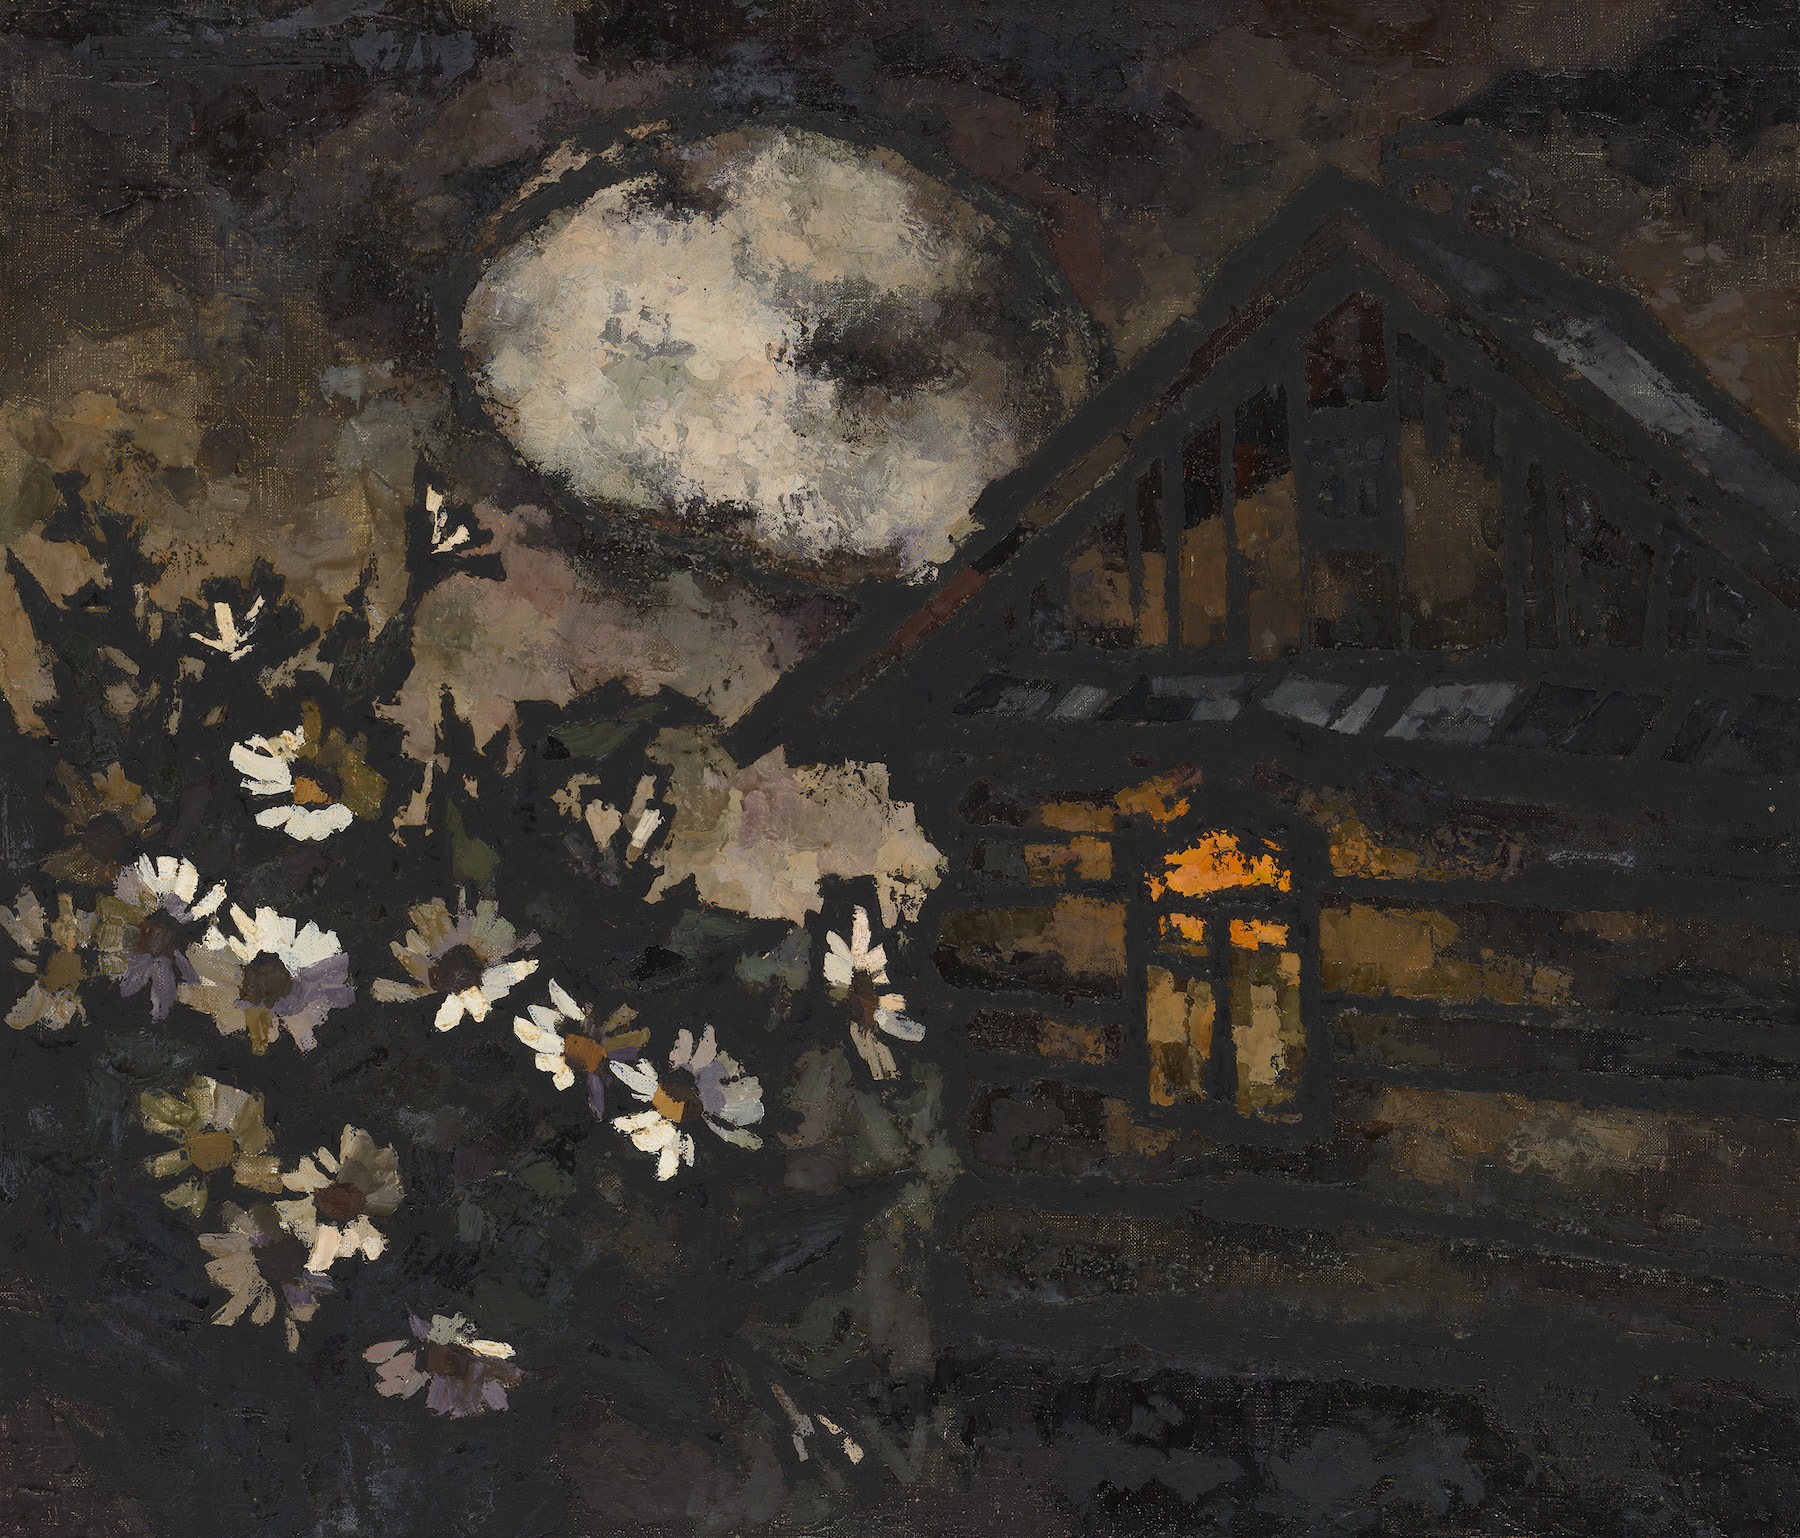 Daisies, Moon and House